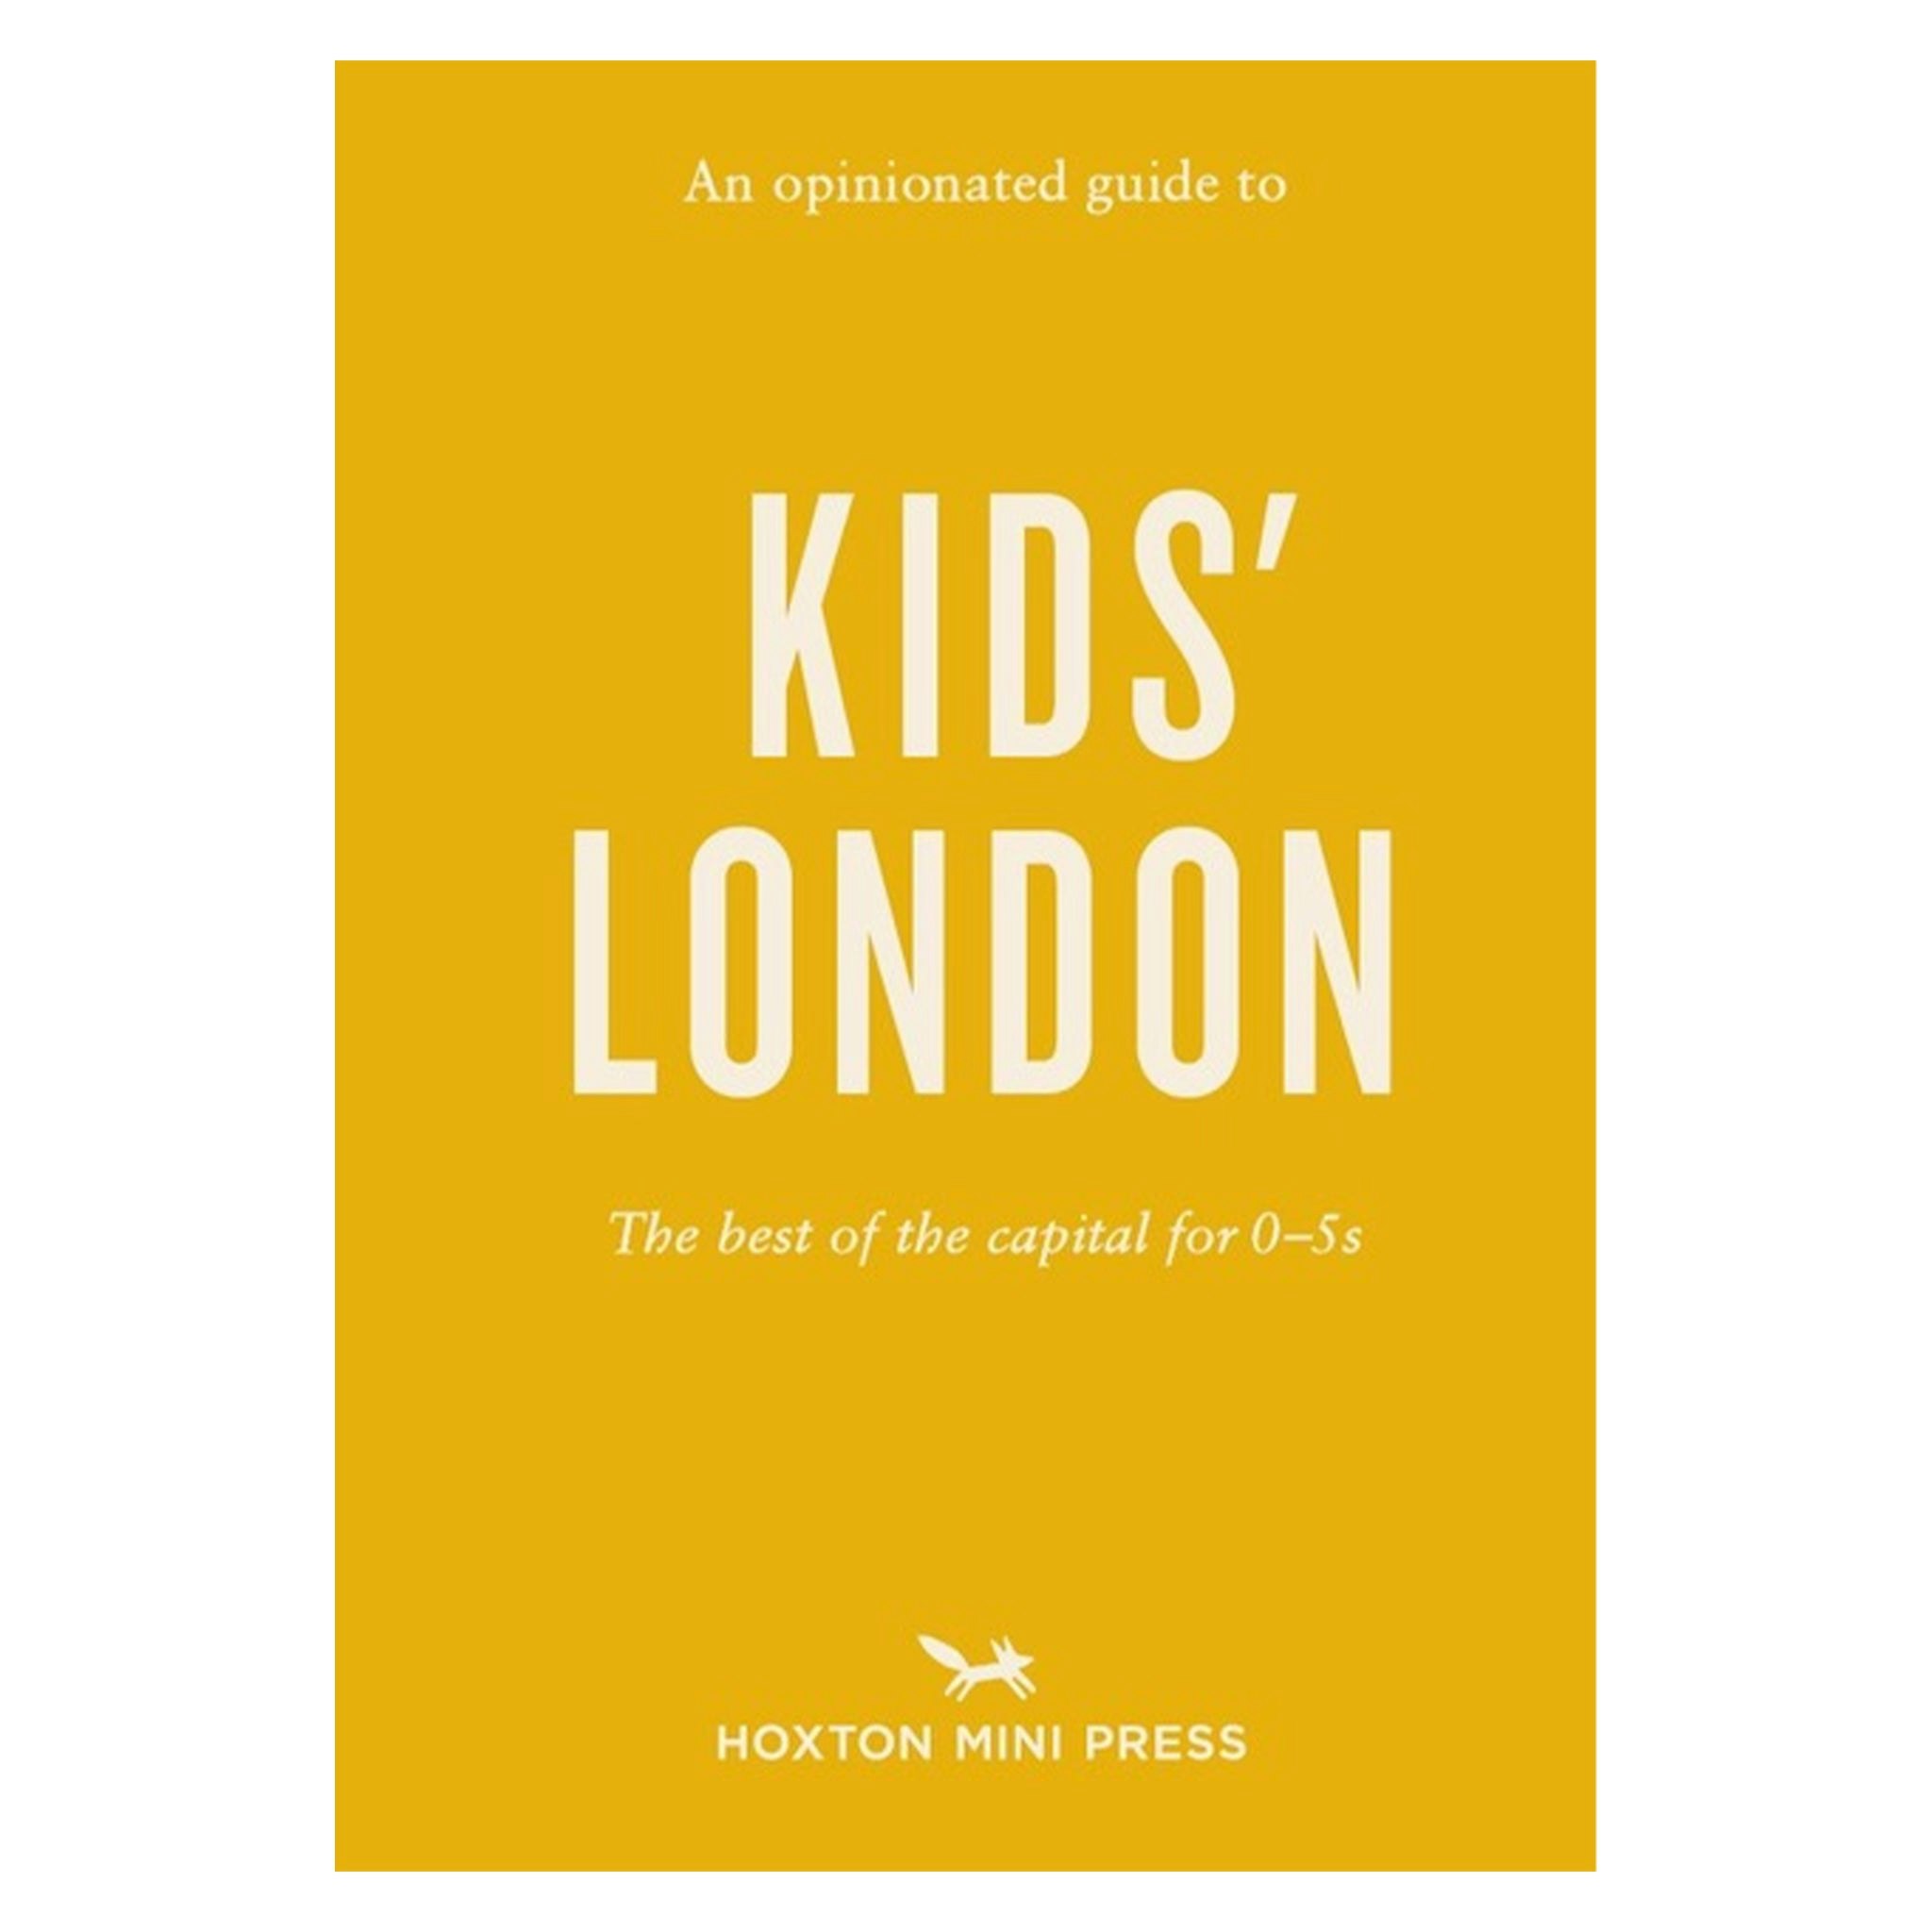 An Opinionated Guide to Kids' London by Hoxton Mini Press